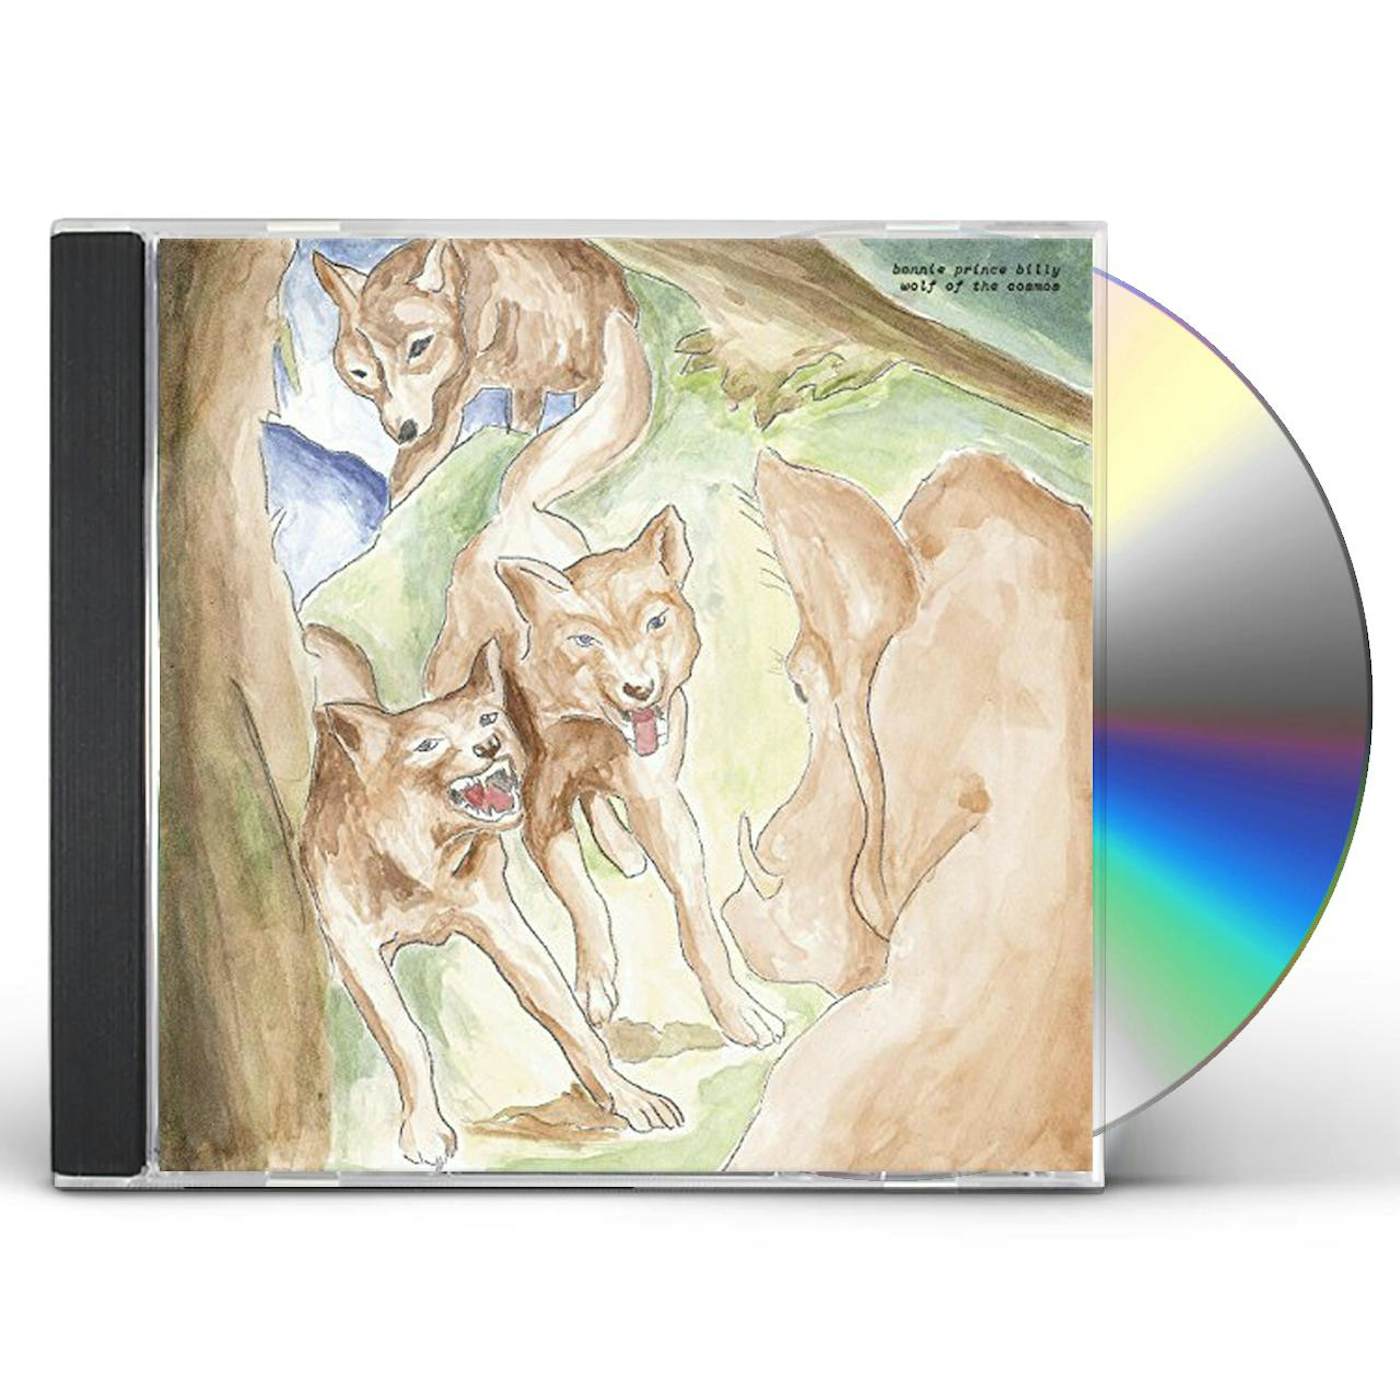 Bonnie Prince Billy WOLF OF THE COSMOS CD